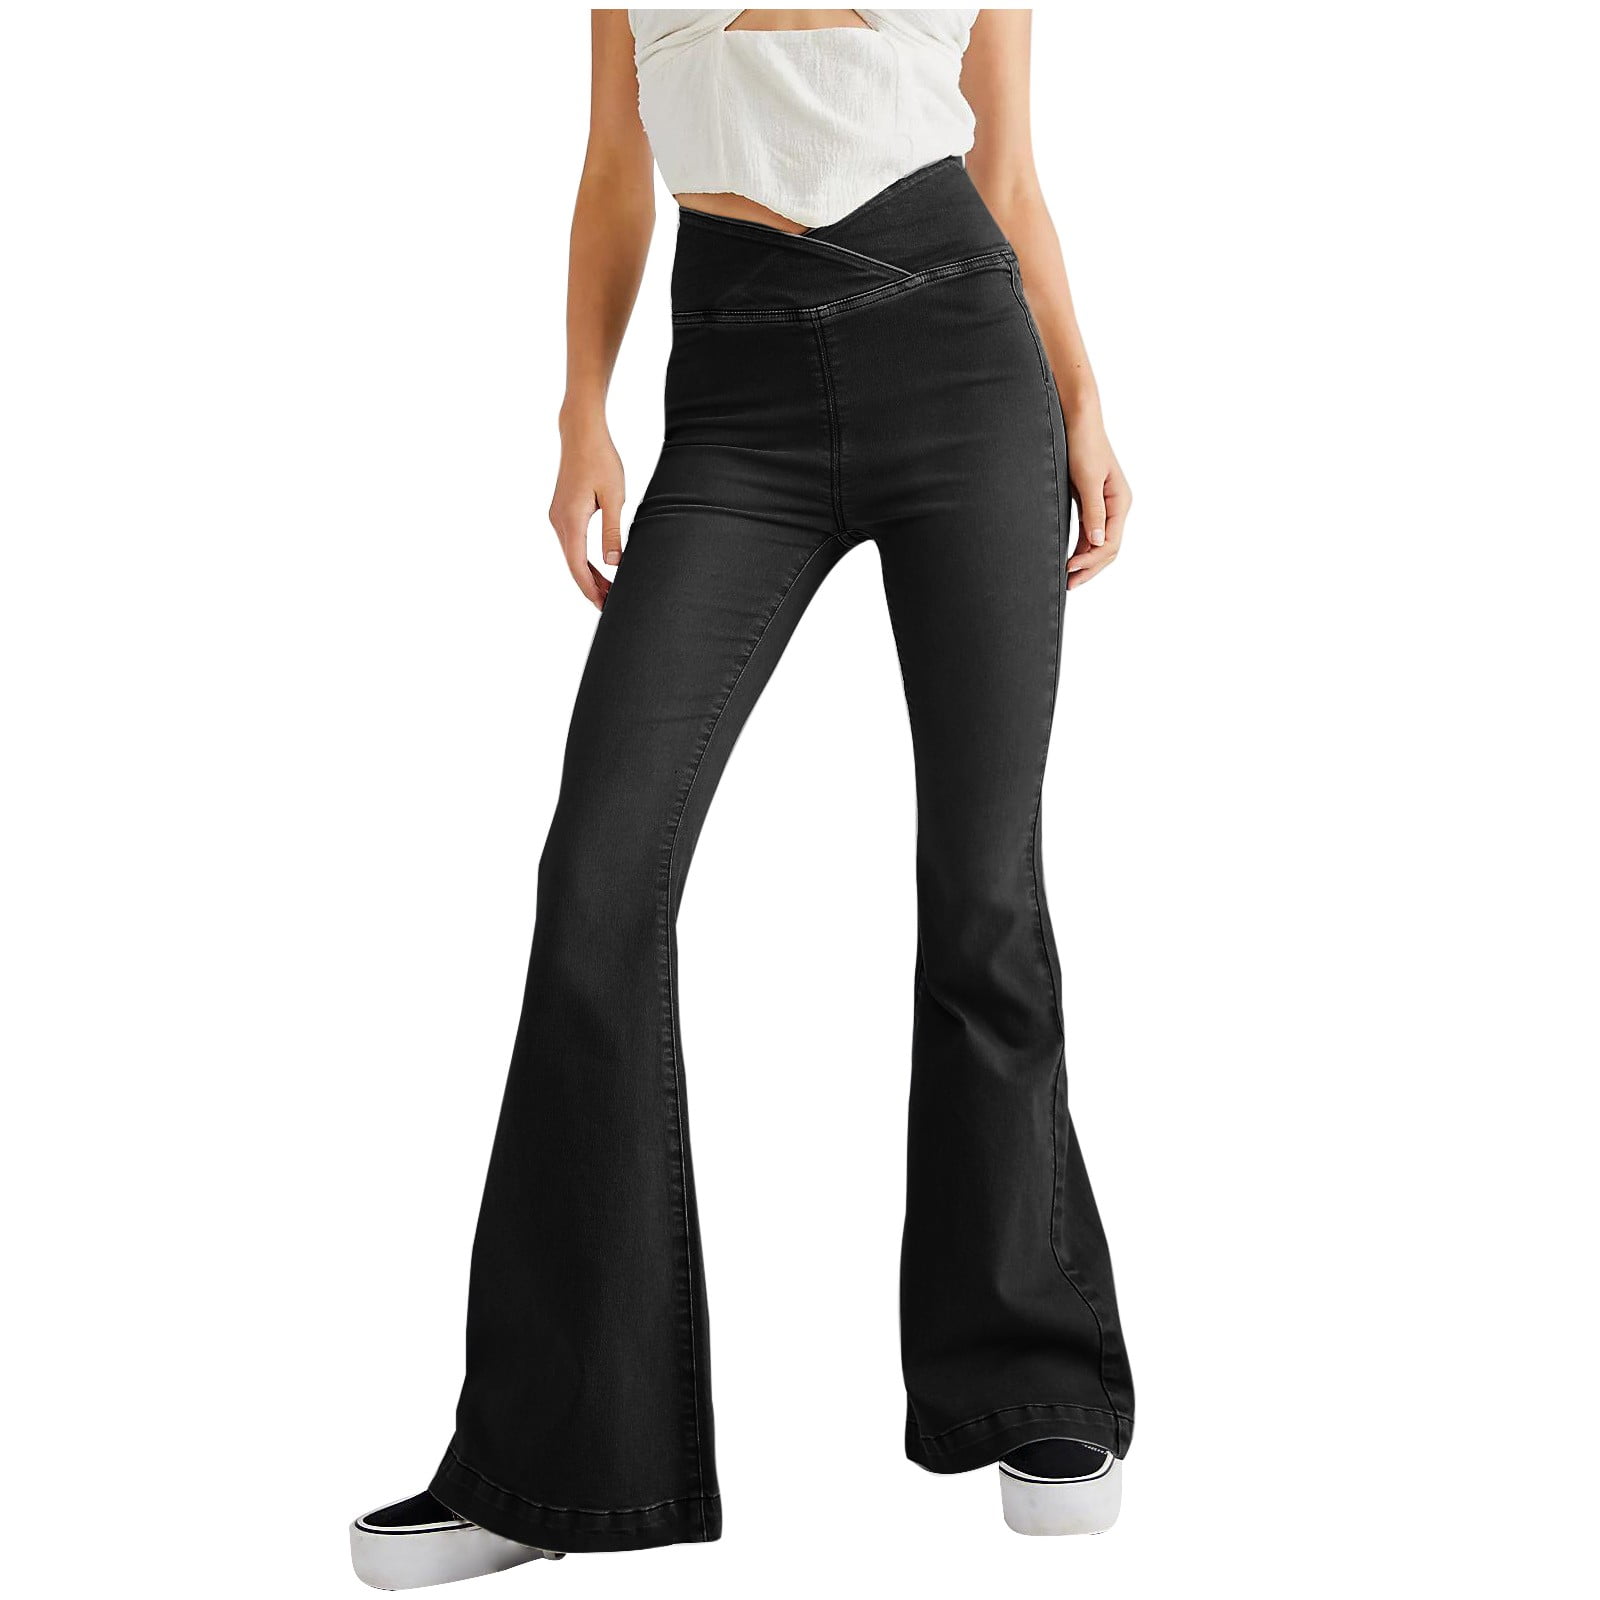 Black Bell Bottoms Women,flare,leggings,plus Size Clothing,yoga,70's  Clothing,festival Pant,fall Outfit,fall Trend 